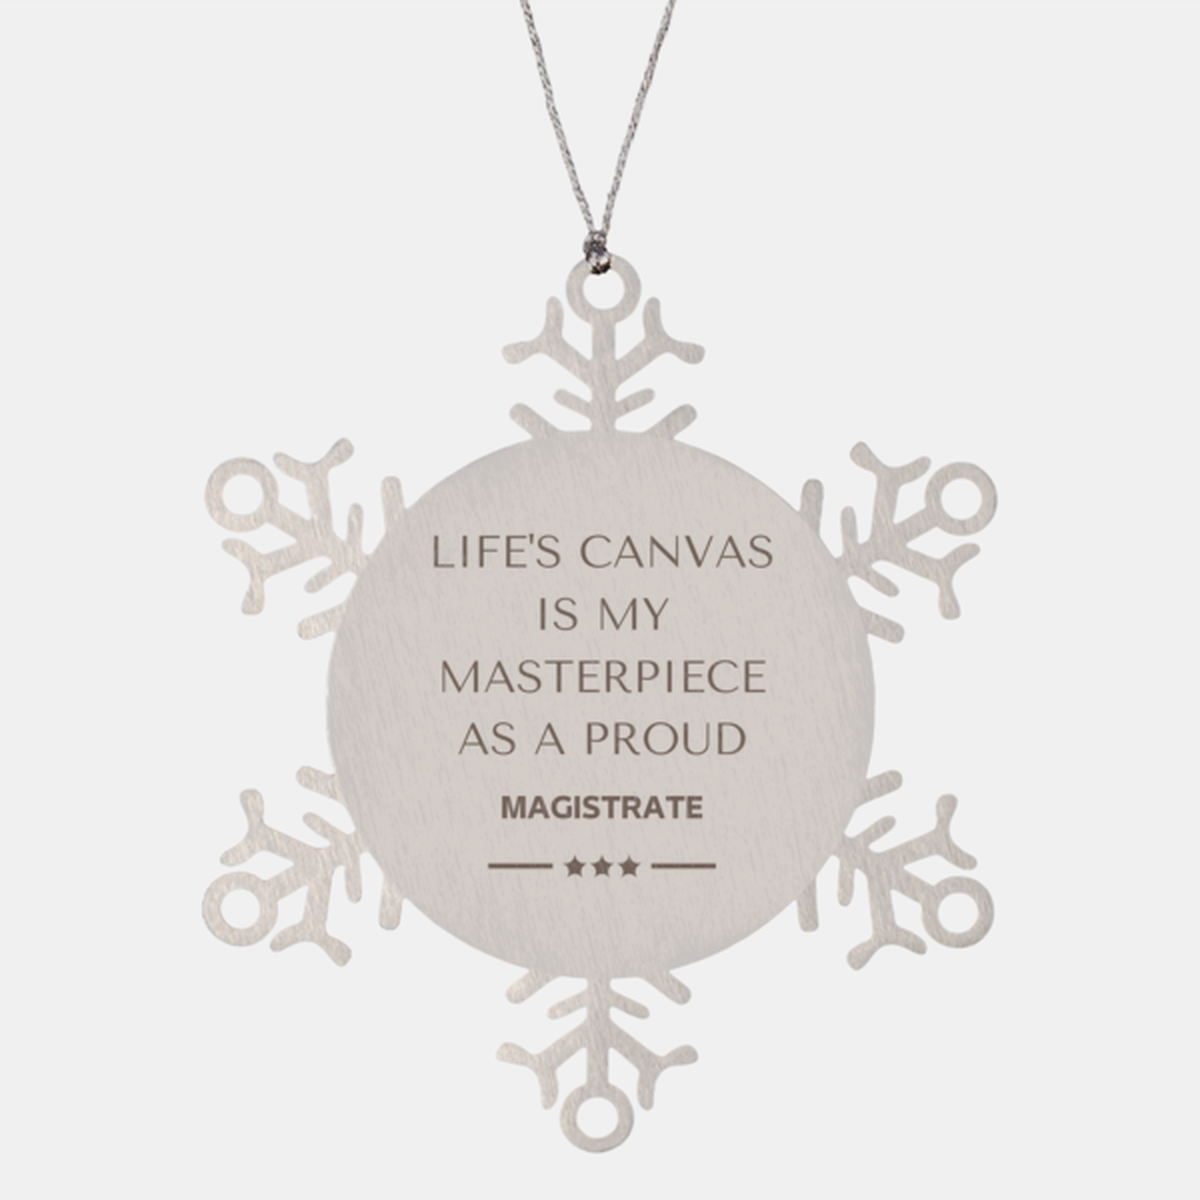 Proud Magistrate Gifts, Life's canvas is my masterpiece, Epic Birthday Christmas Unique Snowflake Ornament For Magistrate, Coworkers, Men, Women, Friends